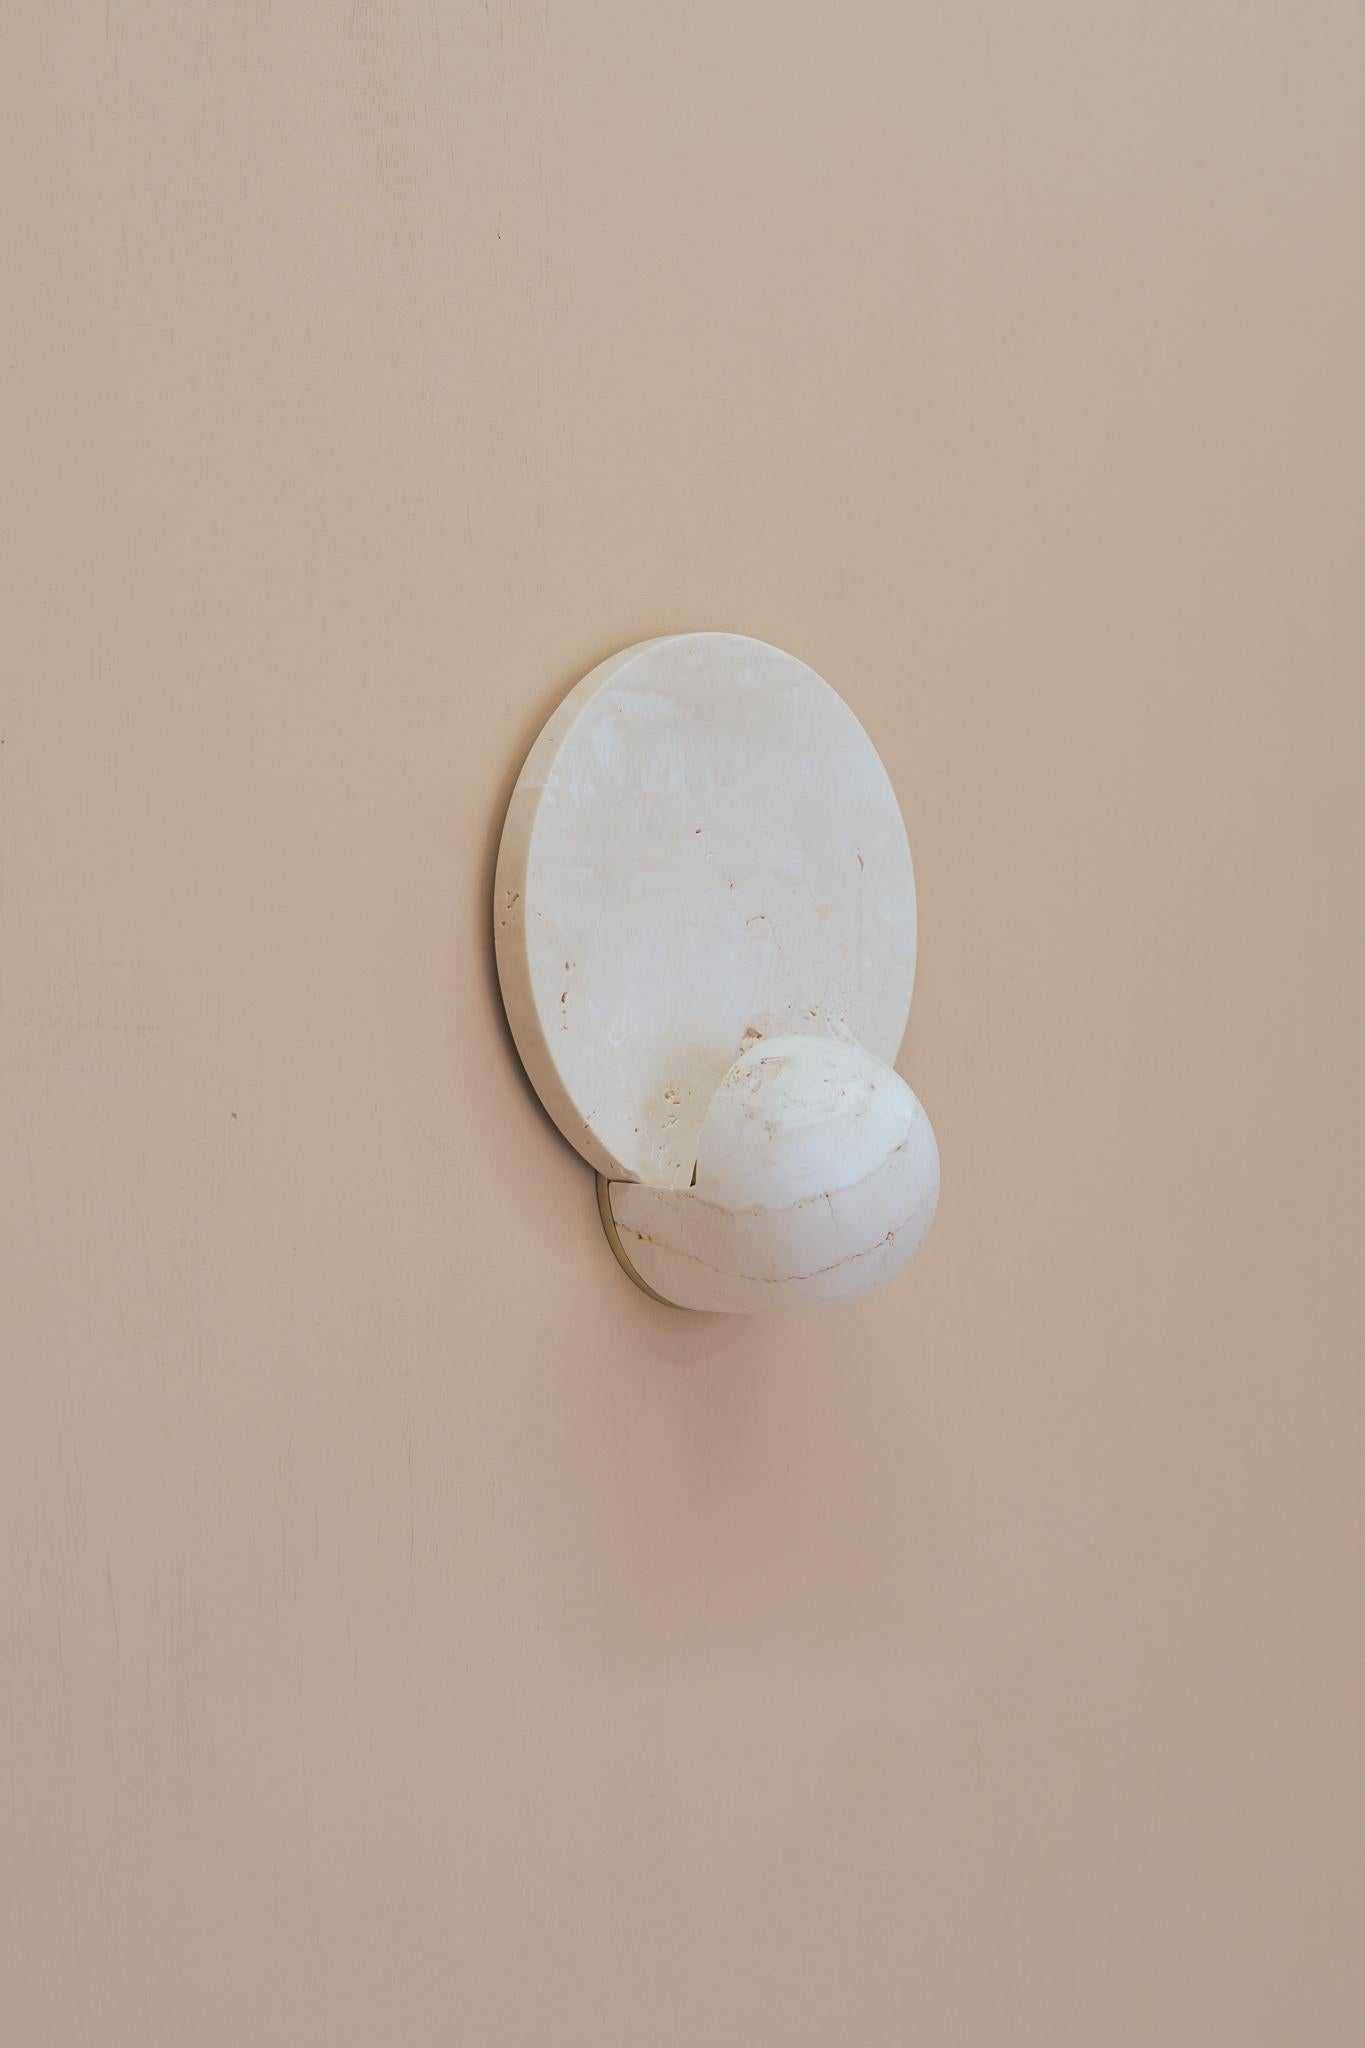 American Taba Wall Sconce by Swell Studio